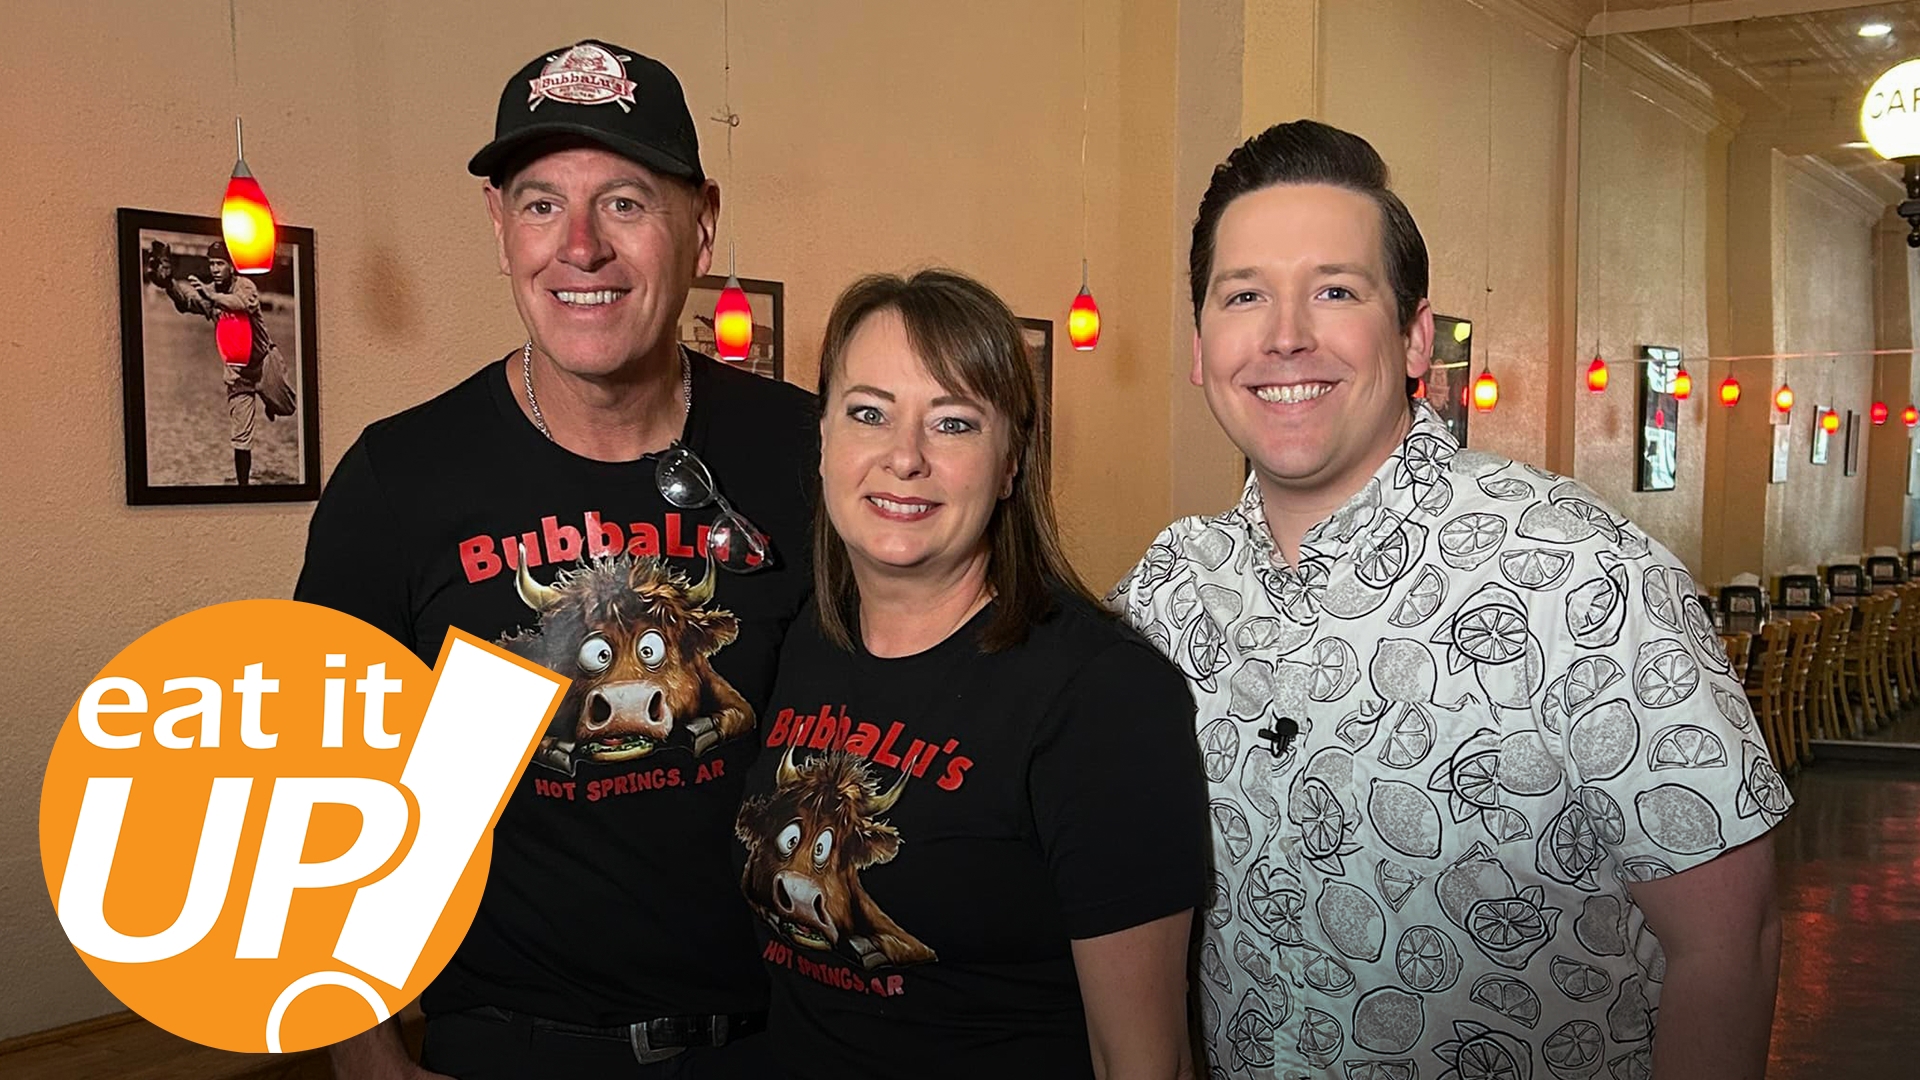 On this week's Eat It Up, Hayden Balgavy visits BubbaLu's, a family-friendly restaurant that's been serving delicious food in Hot Springs for generations.